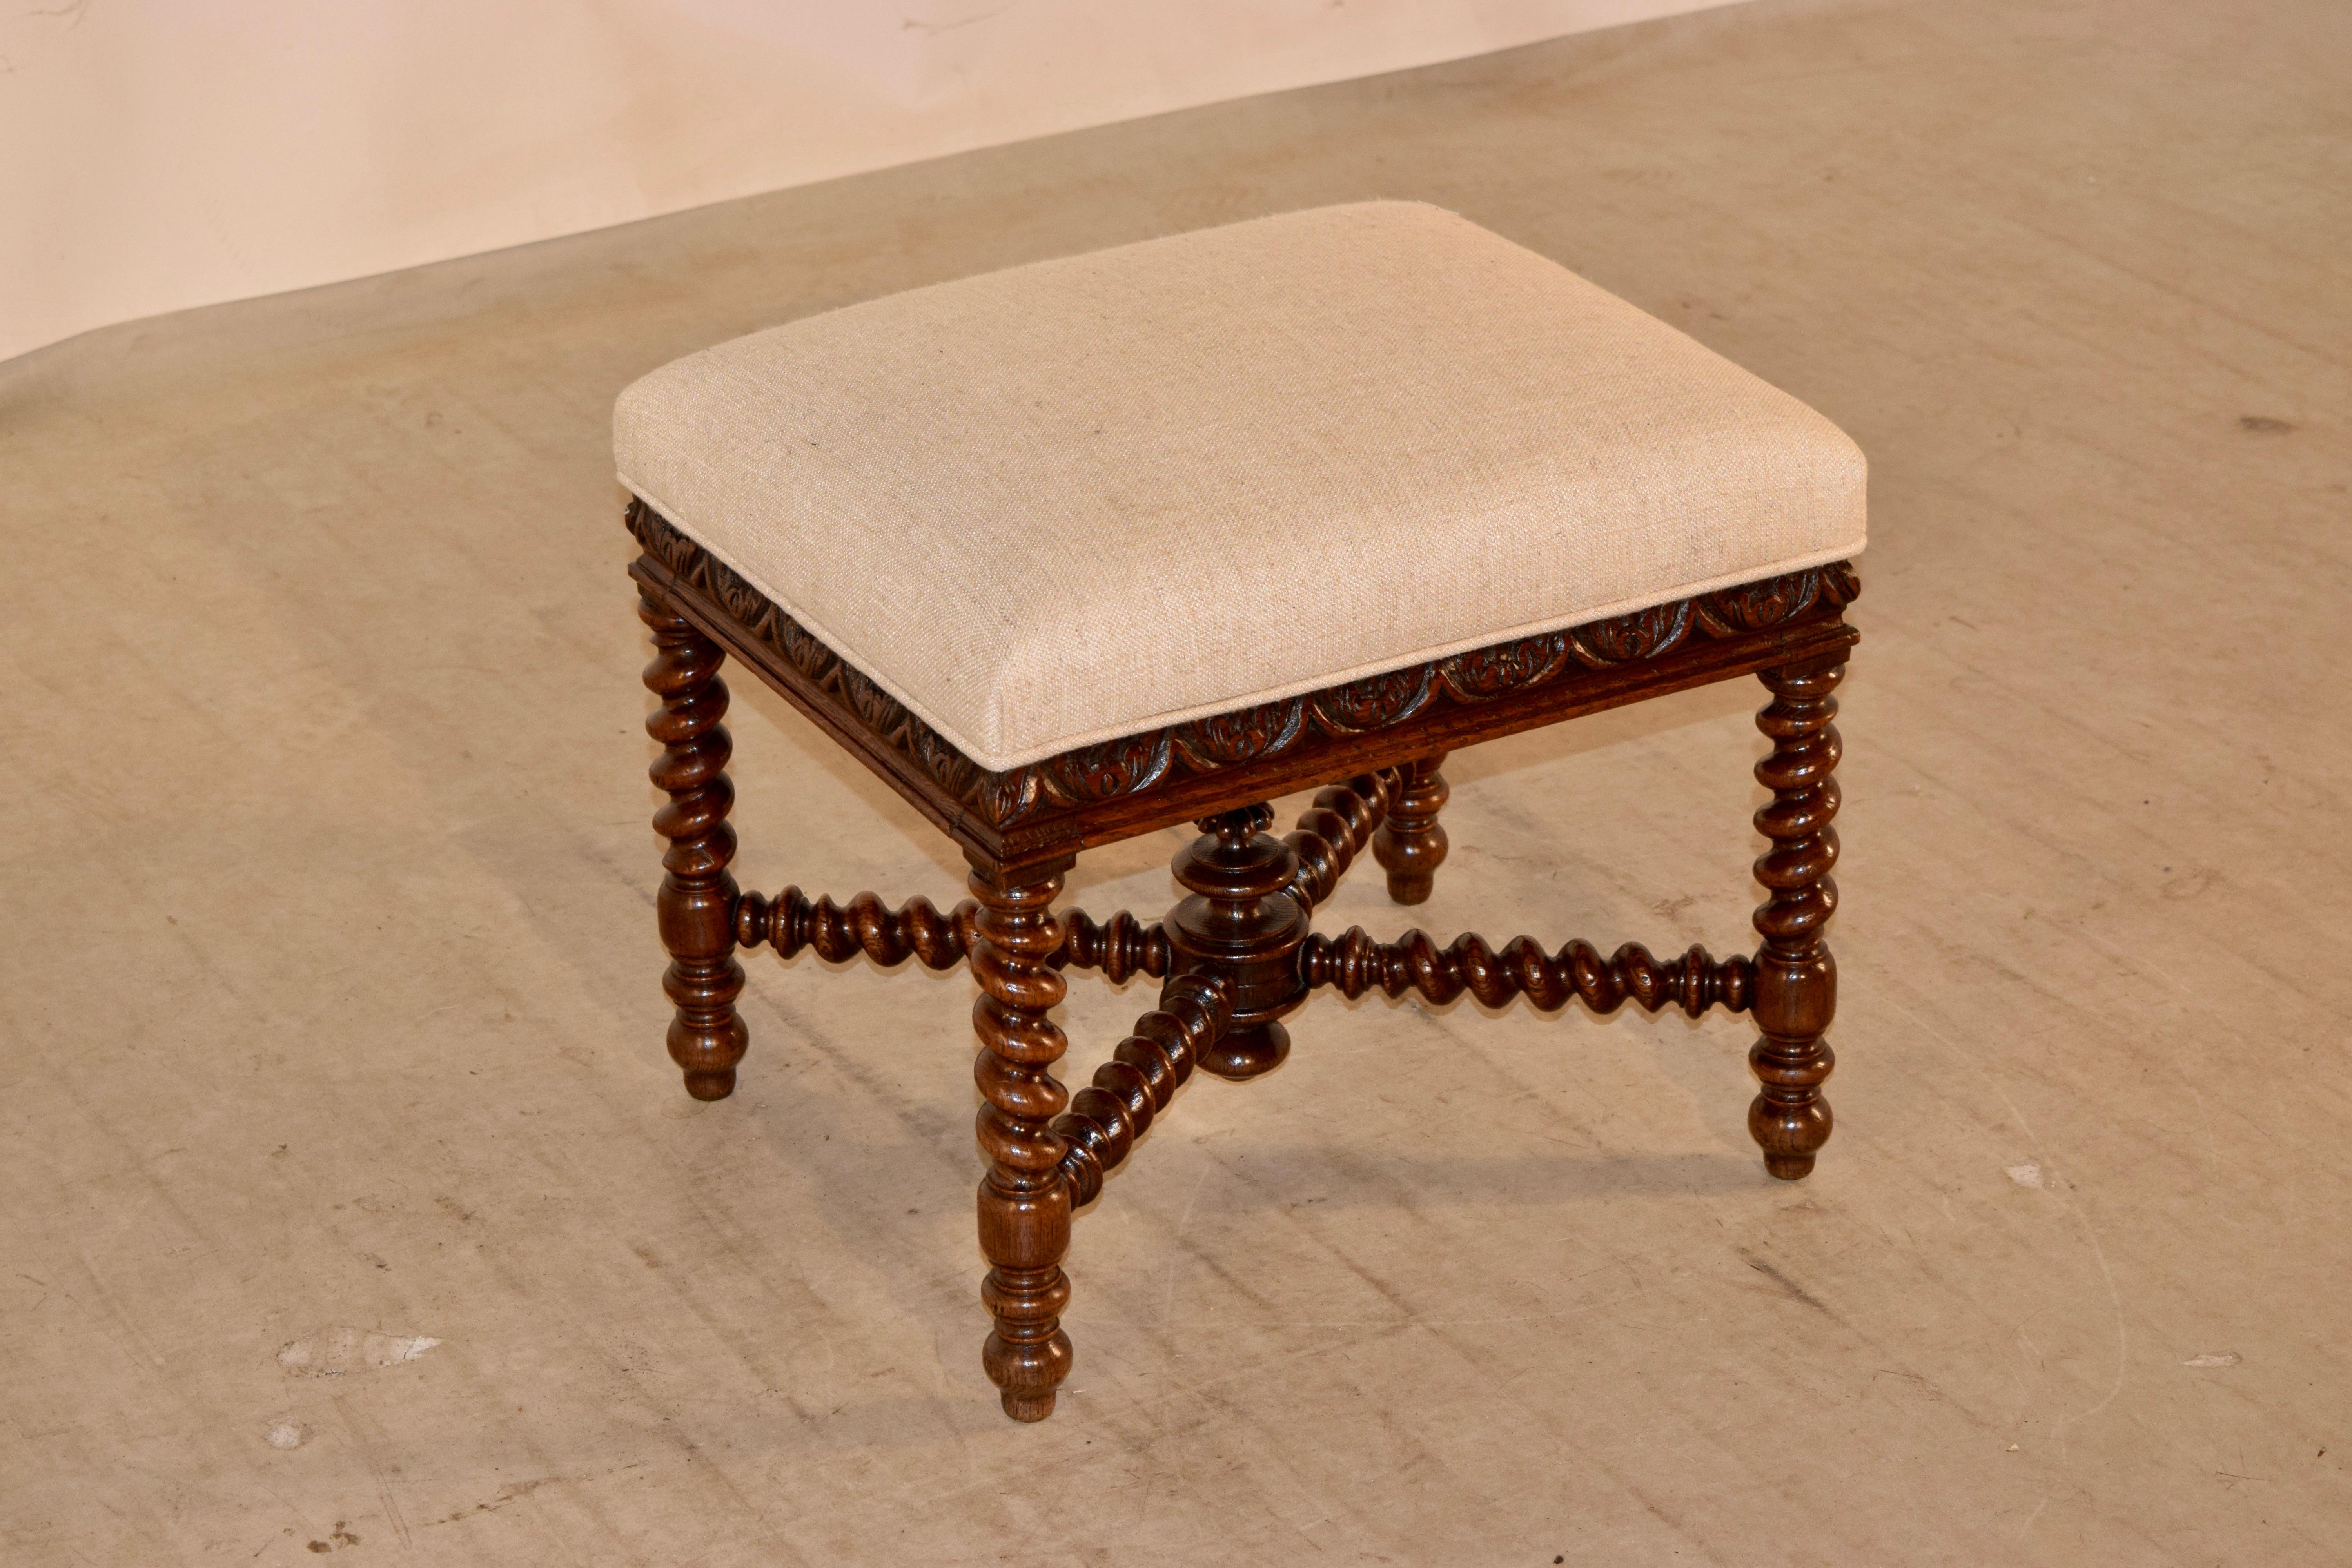 19th century oak stool from France with a newly upholstered seat in linen. The frame has wonderfully hand-turned barley twist legs and cross stretchers below a lovely hand carved and molded base to the seat. Finished with a hand-turned finial in the